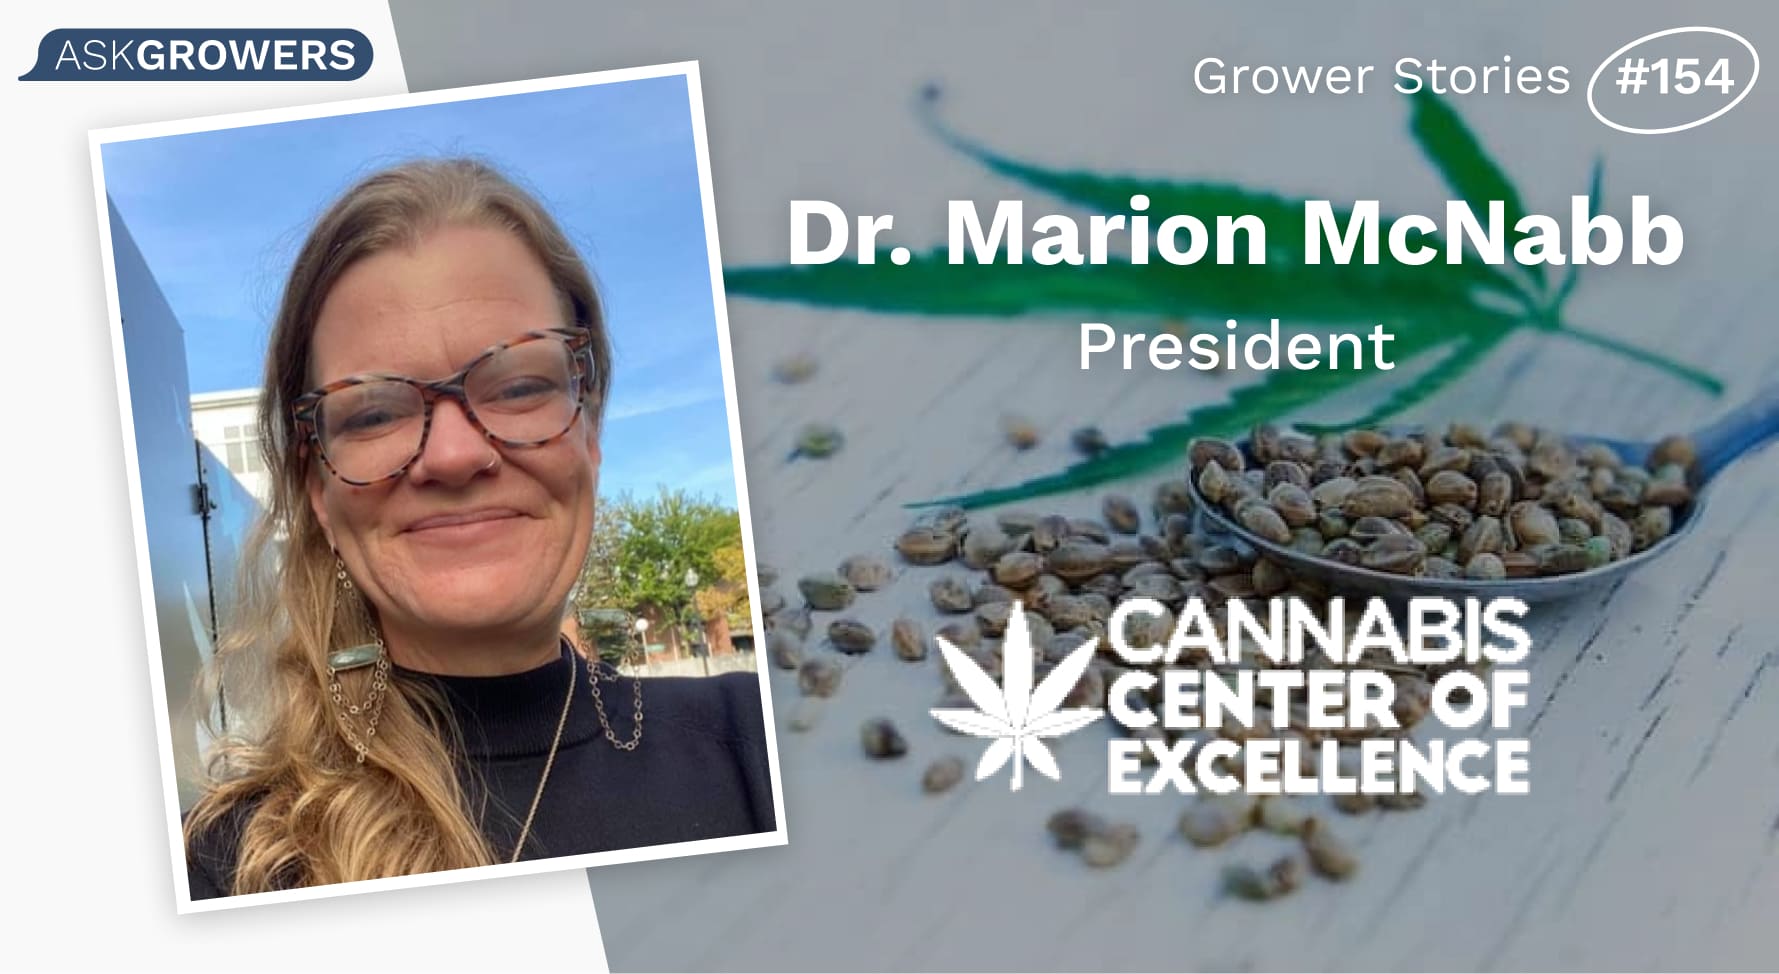 Grower Stories #154: Dr. Marion McNabb